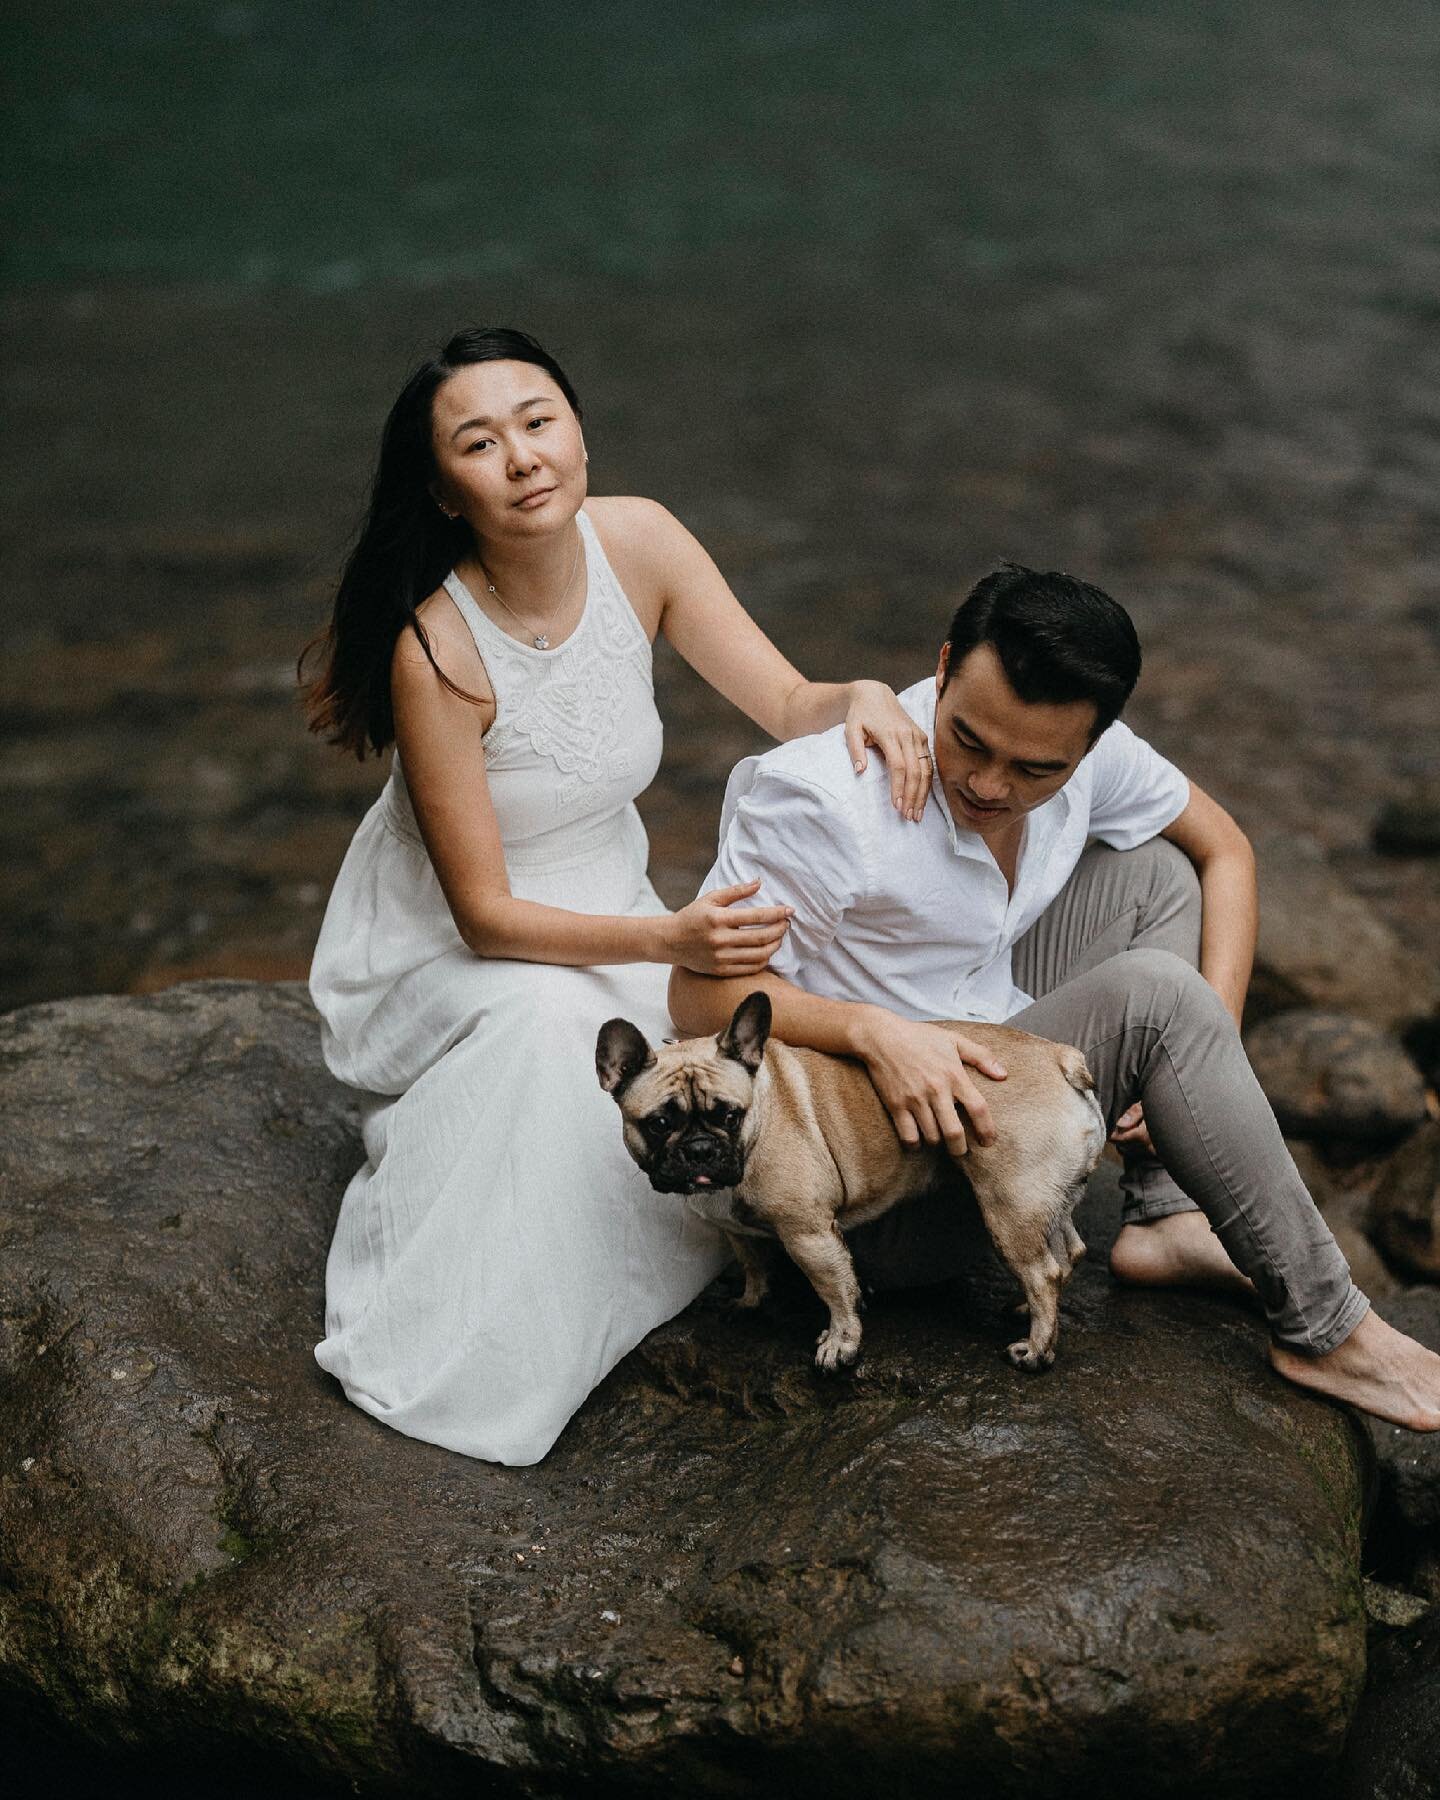 We want to dedicate this post to all of us who believe that pets are like family, unconditional love, unbreakable friendship, the bond goes beyond our humanity.
&mdash;
Our thoughts and love for our friends @rawshoots